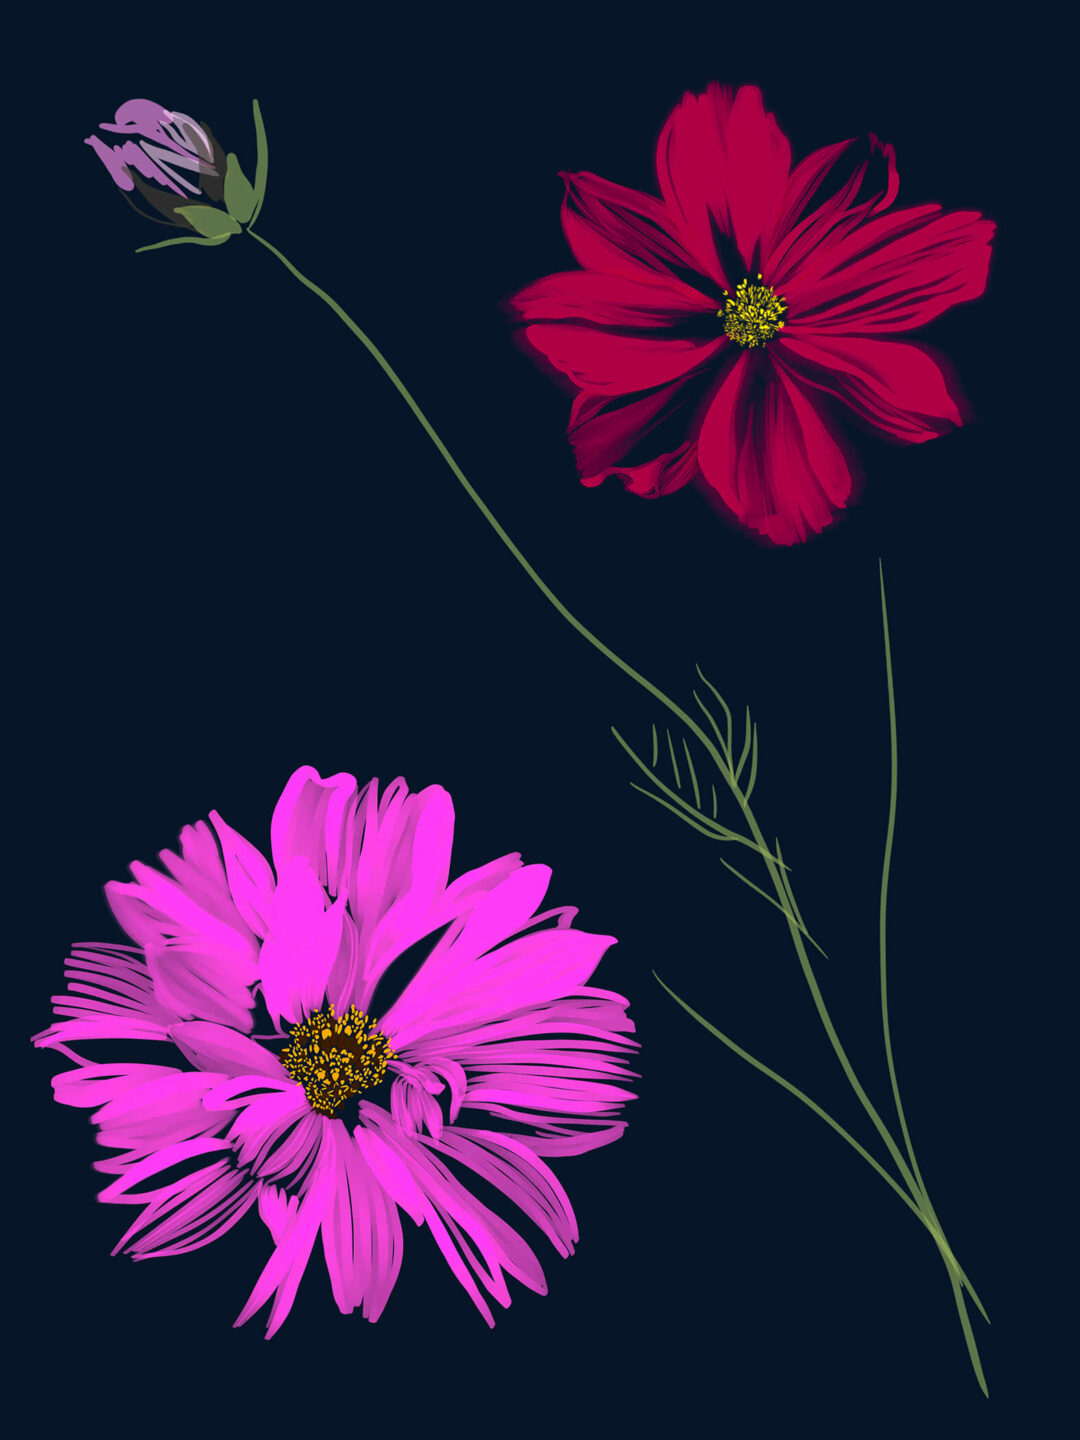 Cosmos Flowers - FLORA editions Art Prints & Cards for Flower Lovers by Catherine Toews - Giclée fine art print on archival paper